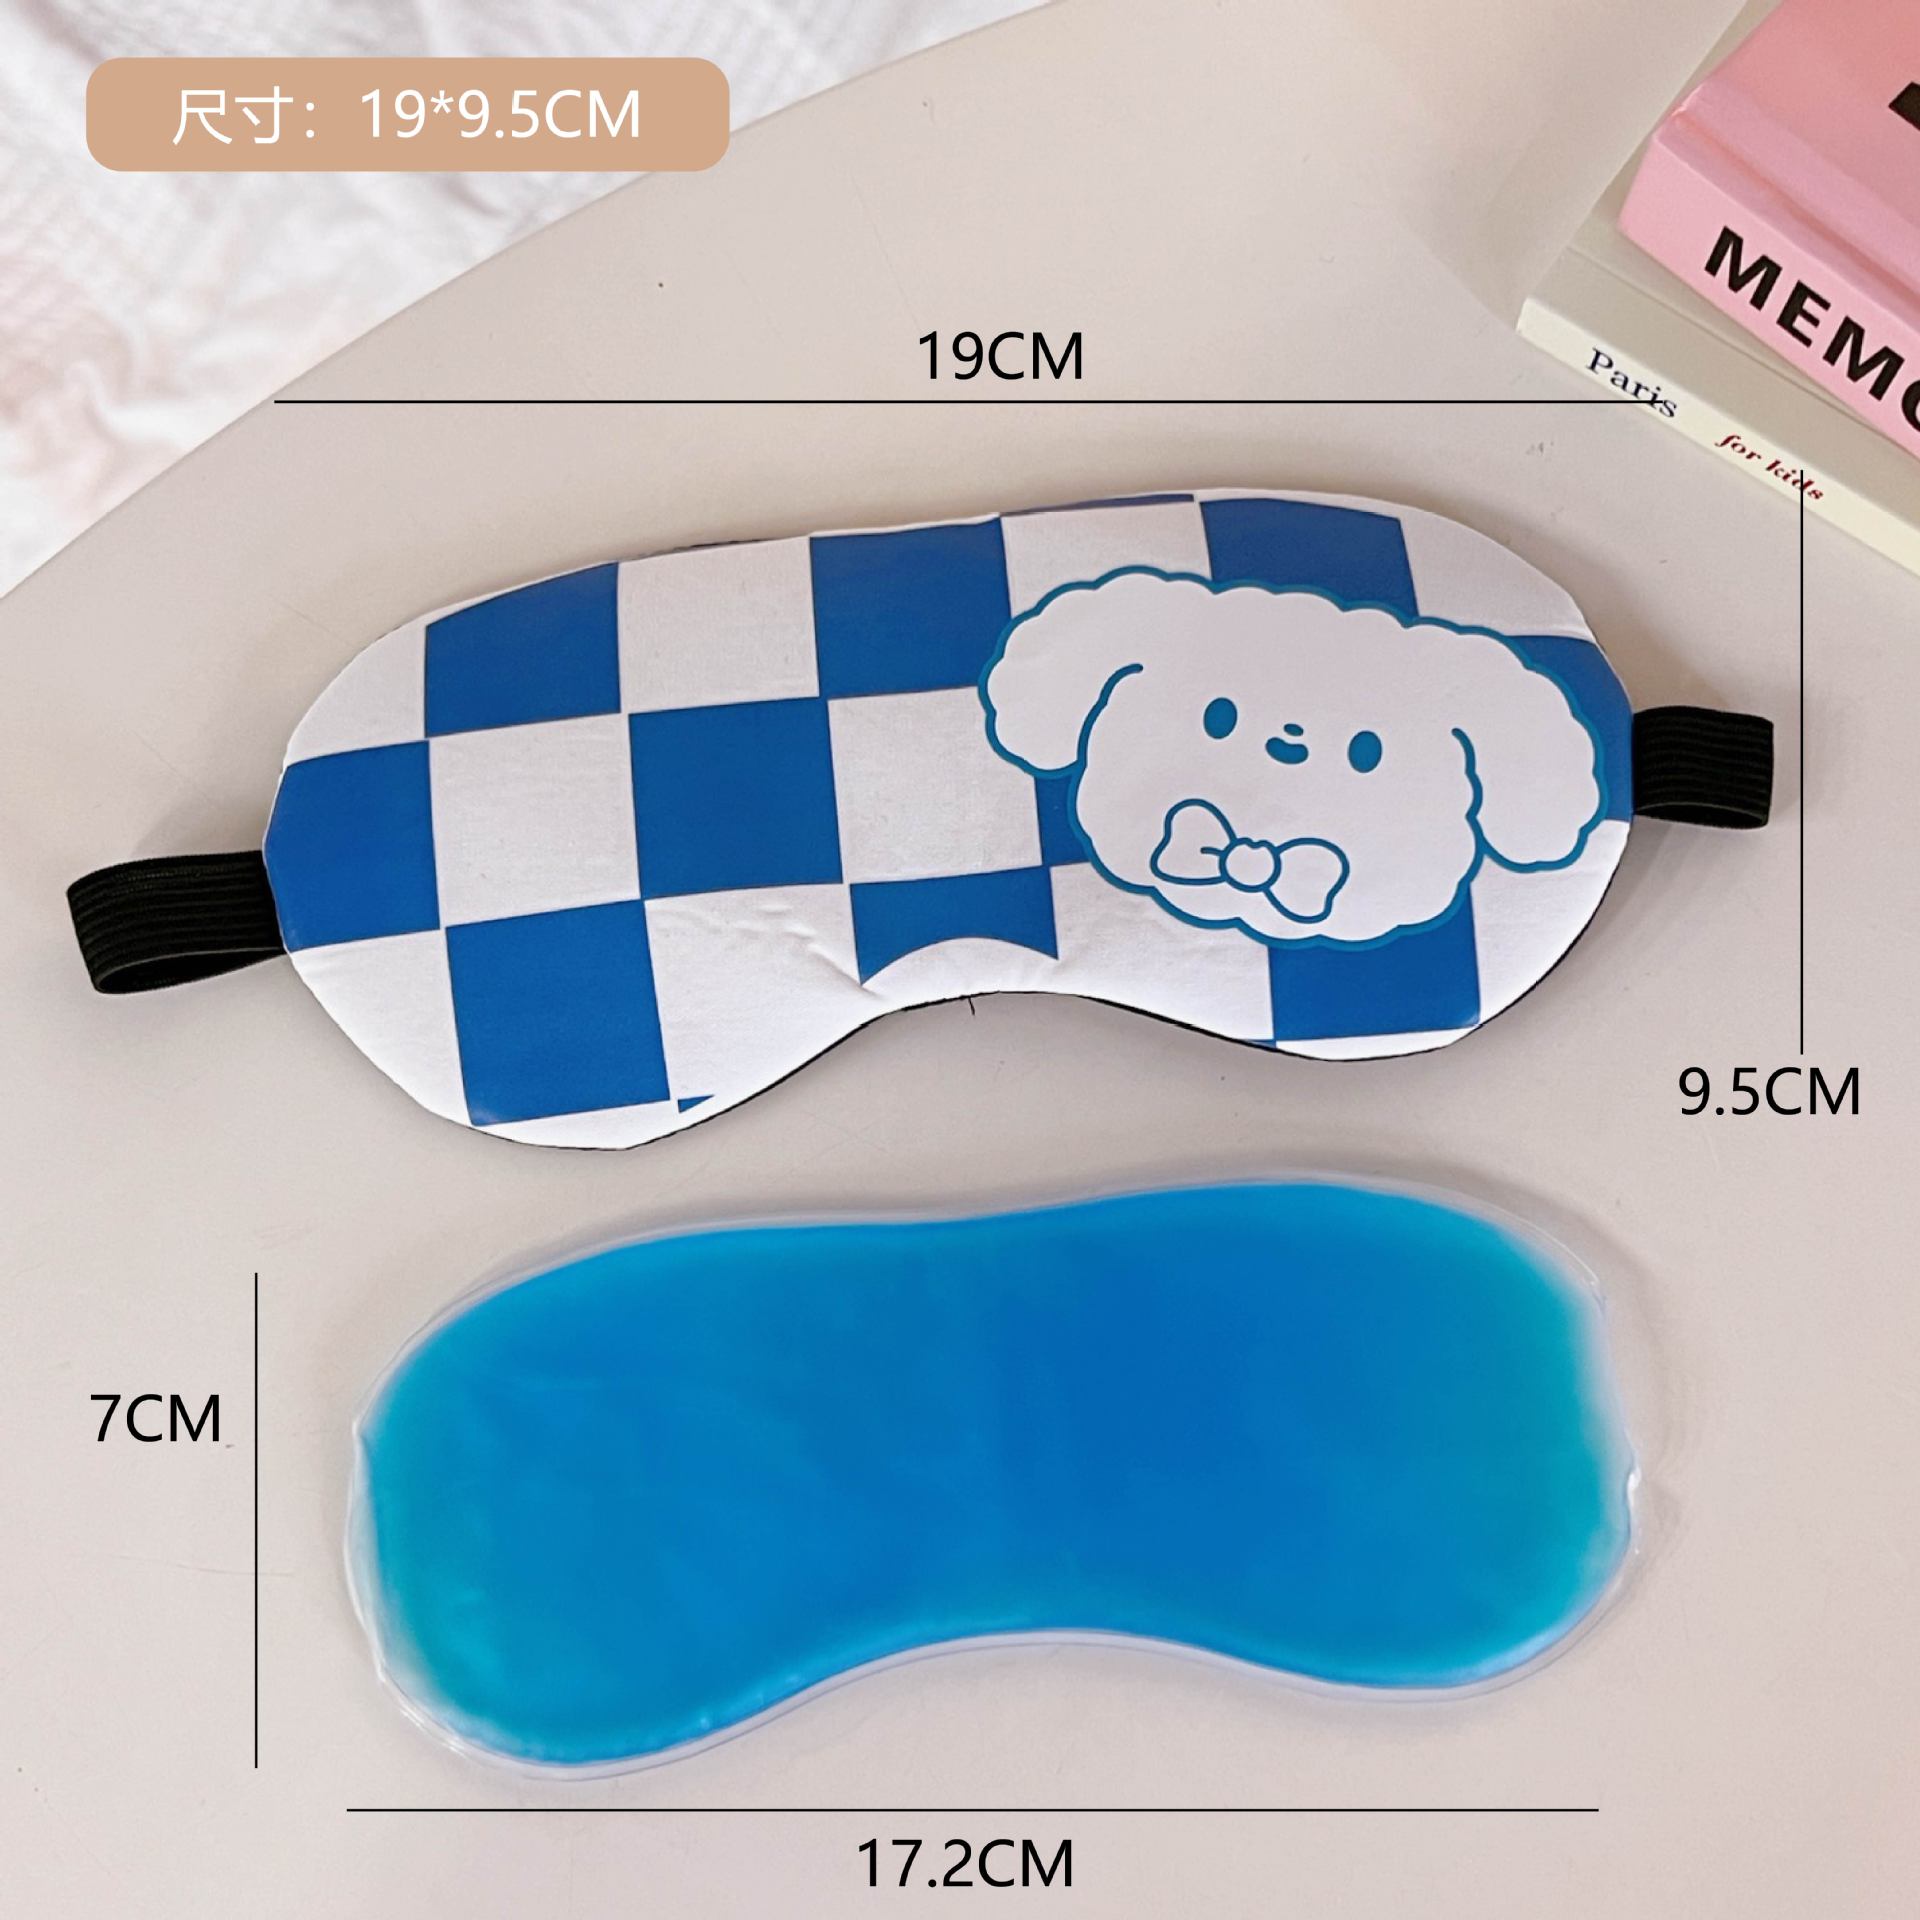 Eye Protection Nap Sleep Special Cute Cartoon Shading Eye Mask for Children and Female Students Ice Pack Ice Compress to Relieve Eye Fatigue